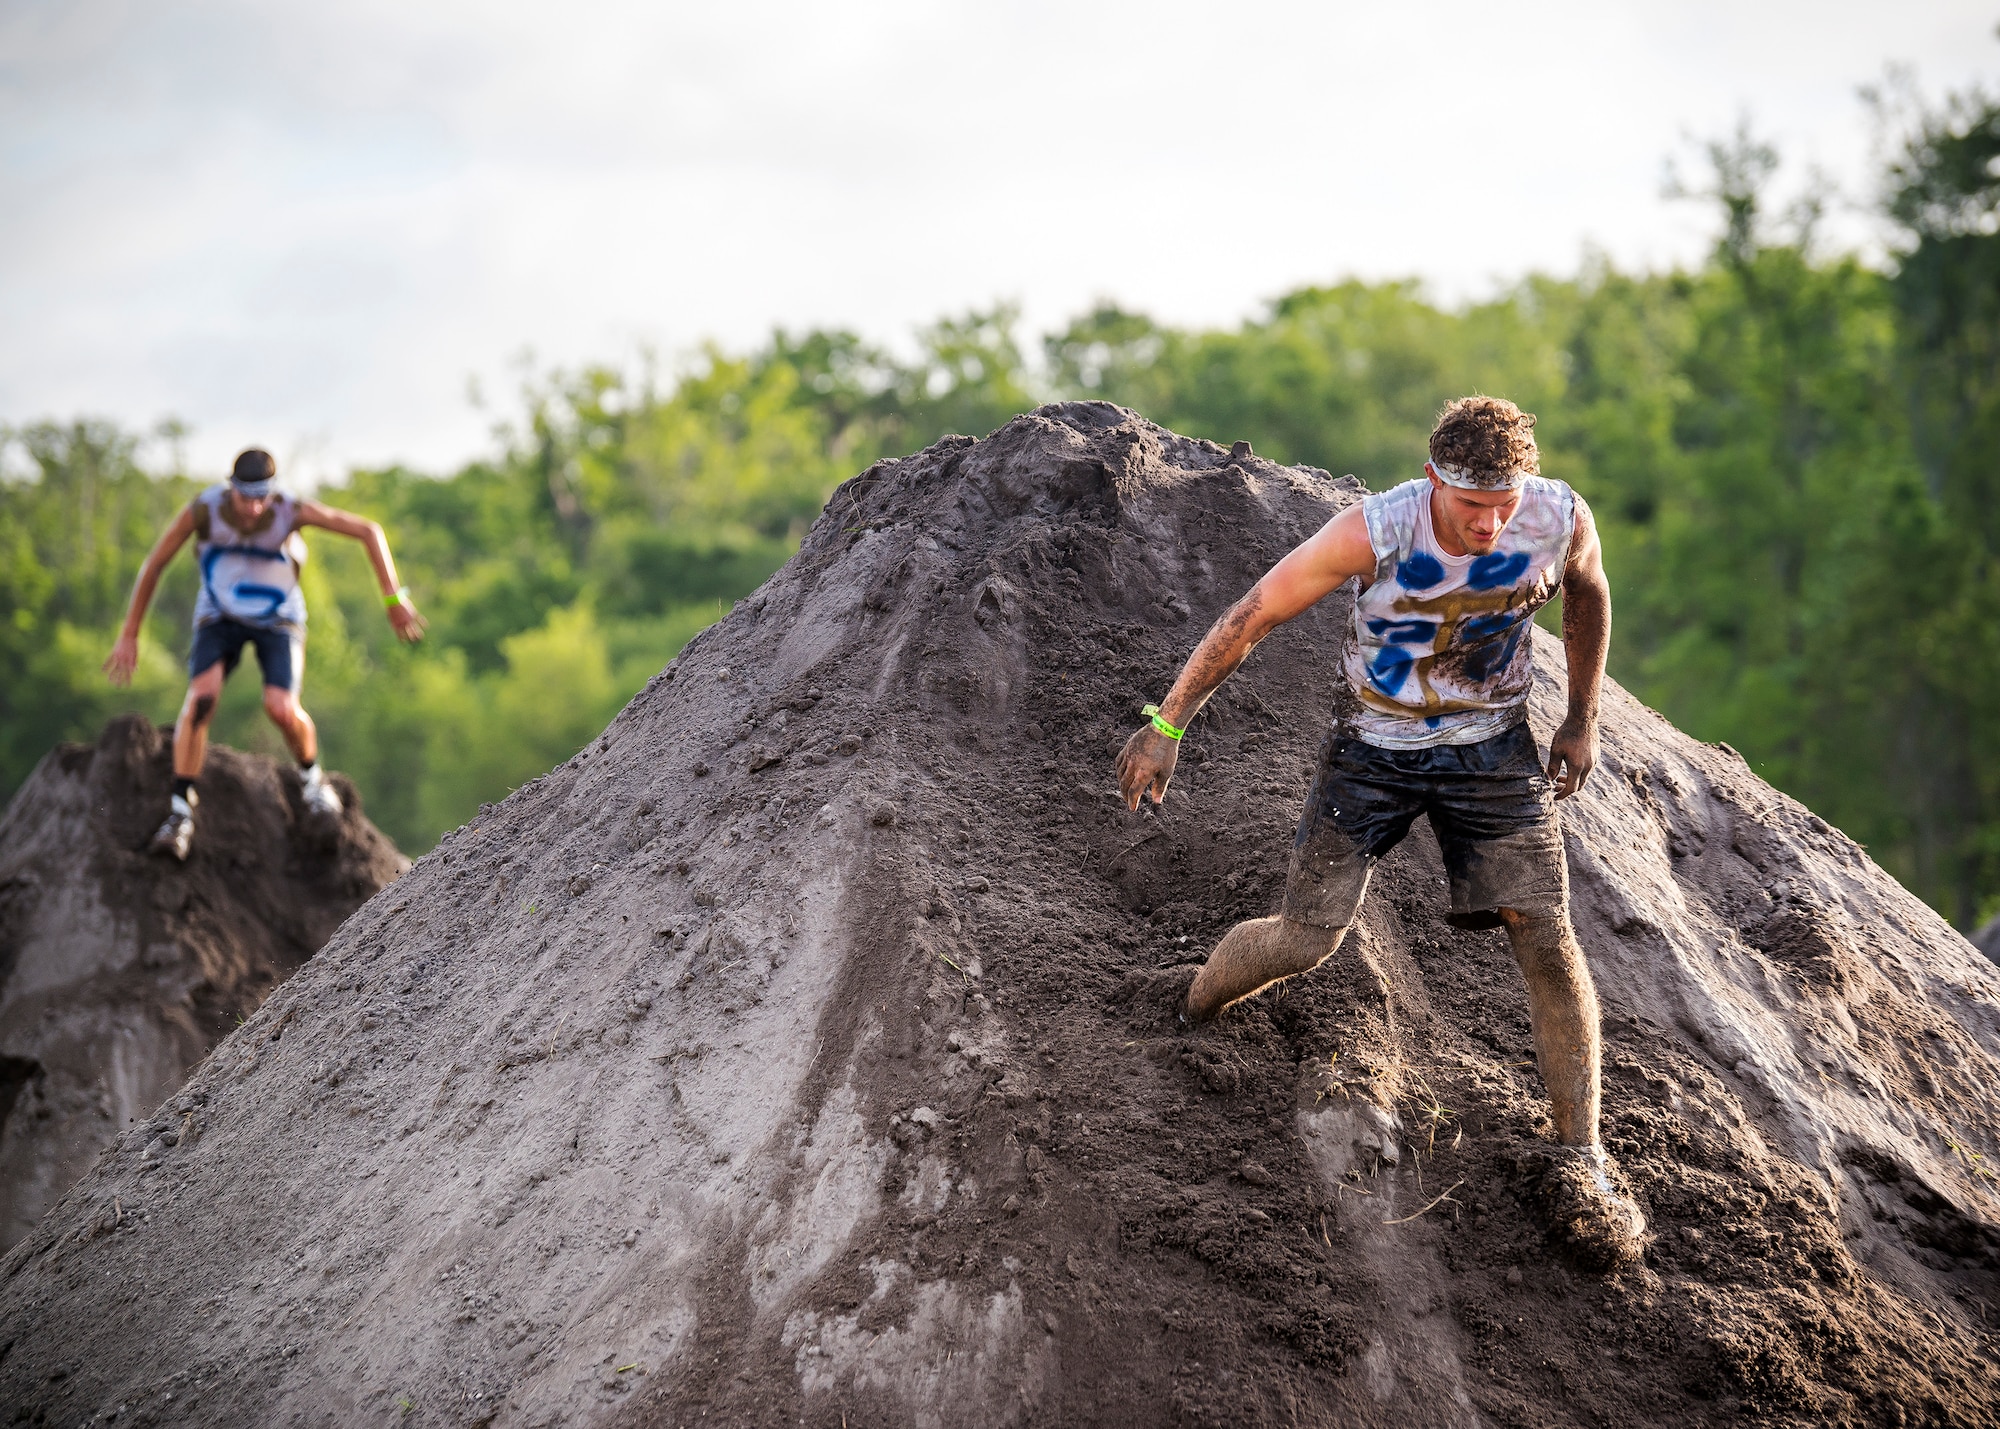 Moody Mud Run participants slide down dirt inclines, May 4, 2019, in Ray City, Ga. The sixth annual Mud Run had approximately 850 participants who had to overcome a series of obstacles on the 4 and 5-mile courses. The 32-obstacle course gave Airmen, families and the local community an opportunity to build camaraderie and teamwork skills. (U.S. Air Force photo by Airman 1st Class Eugene Oliver)